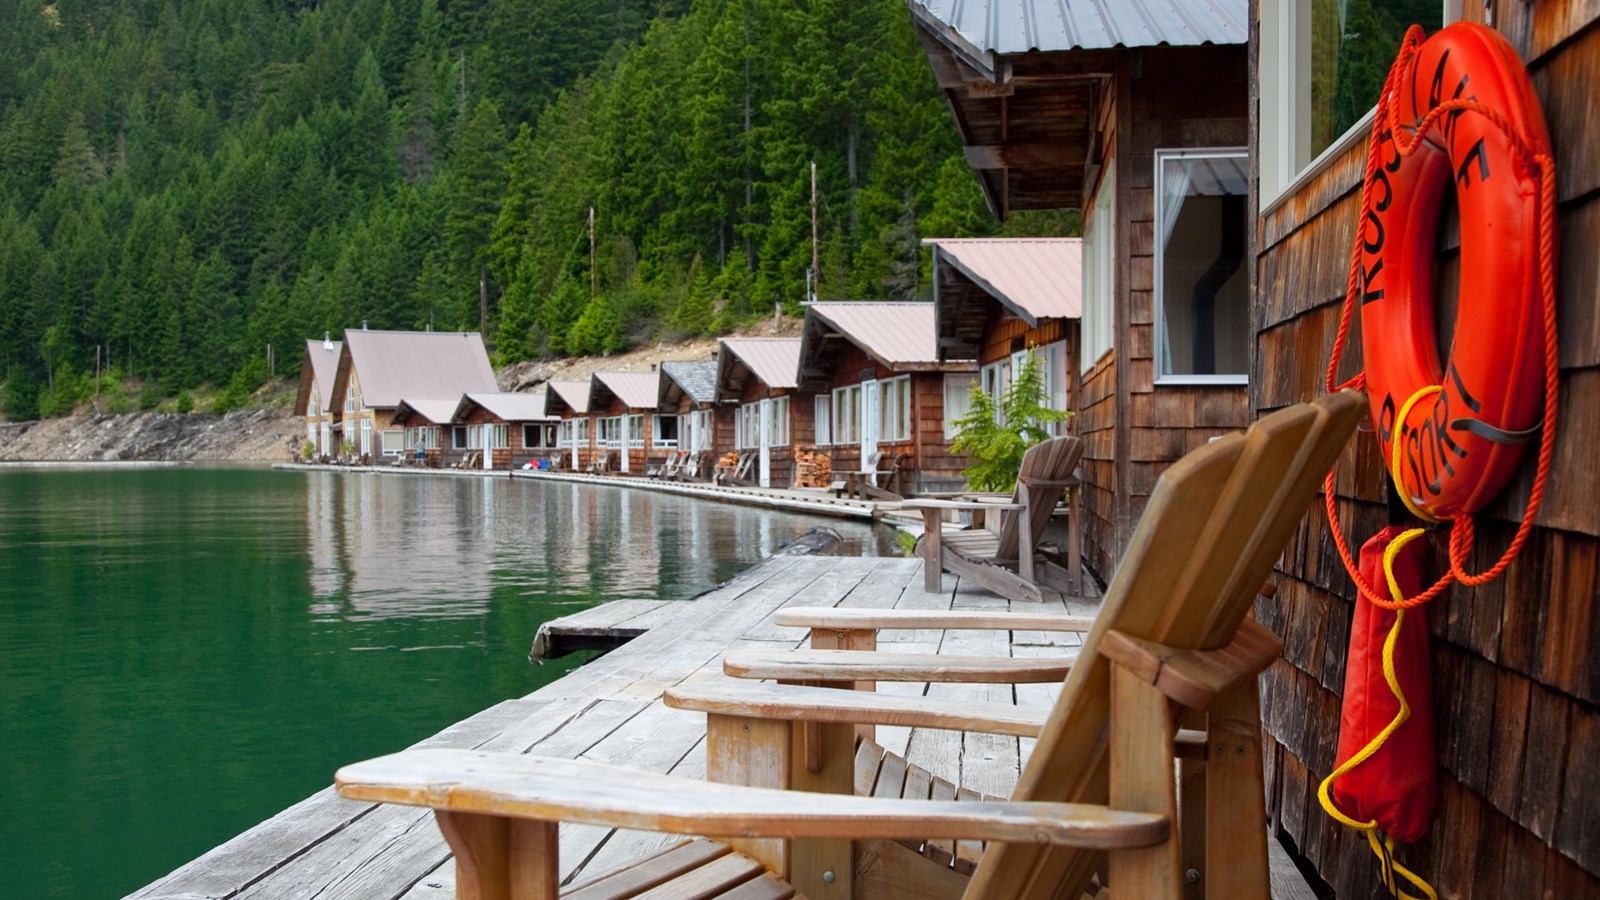 A row of cabins along a green lakeshore.